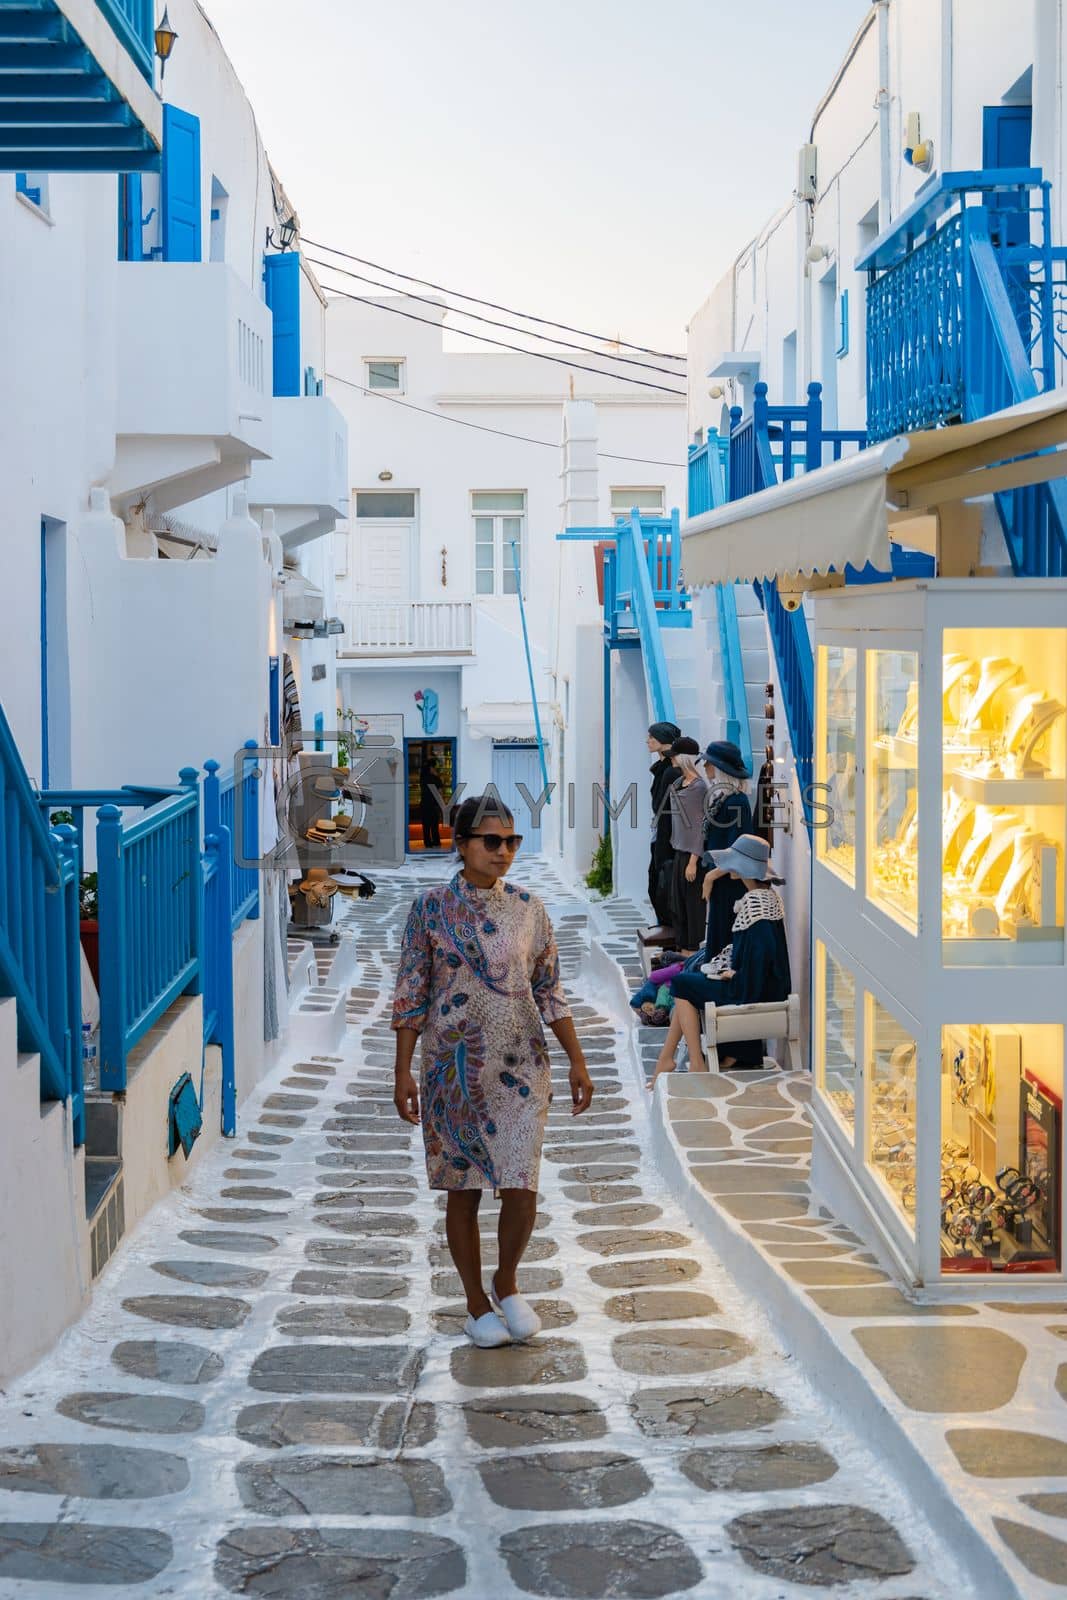 Royalty free image of Tourist at the streets of Mykonos Greek village in Greece, colorful streets of Mikonos village by fokkebok